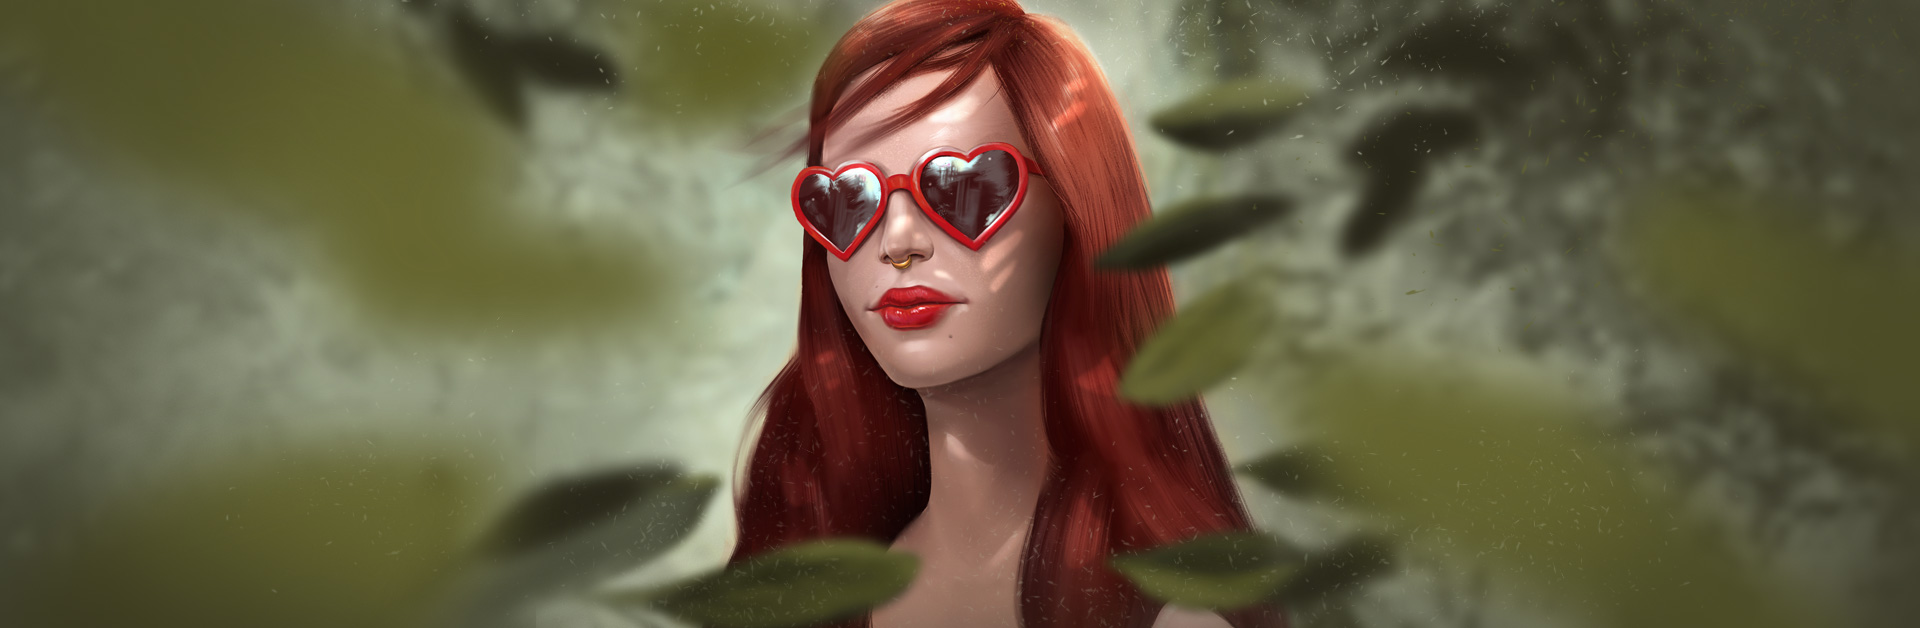 3 Killer Tips for Adding Creative Blur Effects to Your Digital Paintings